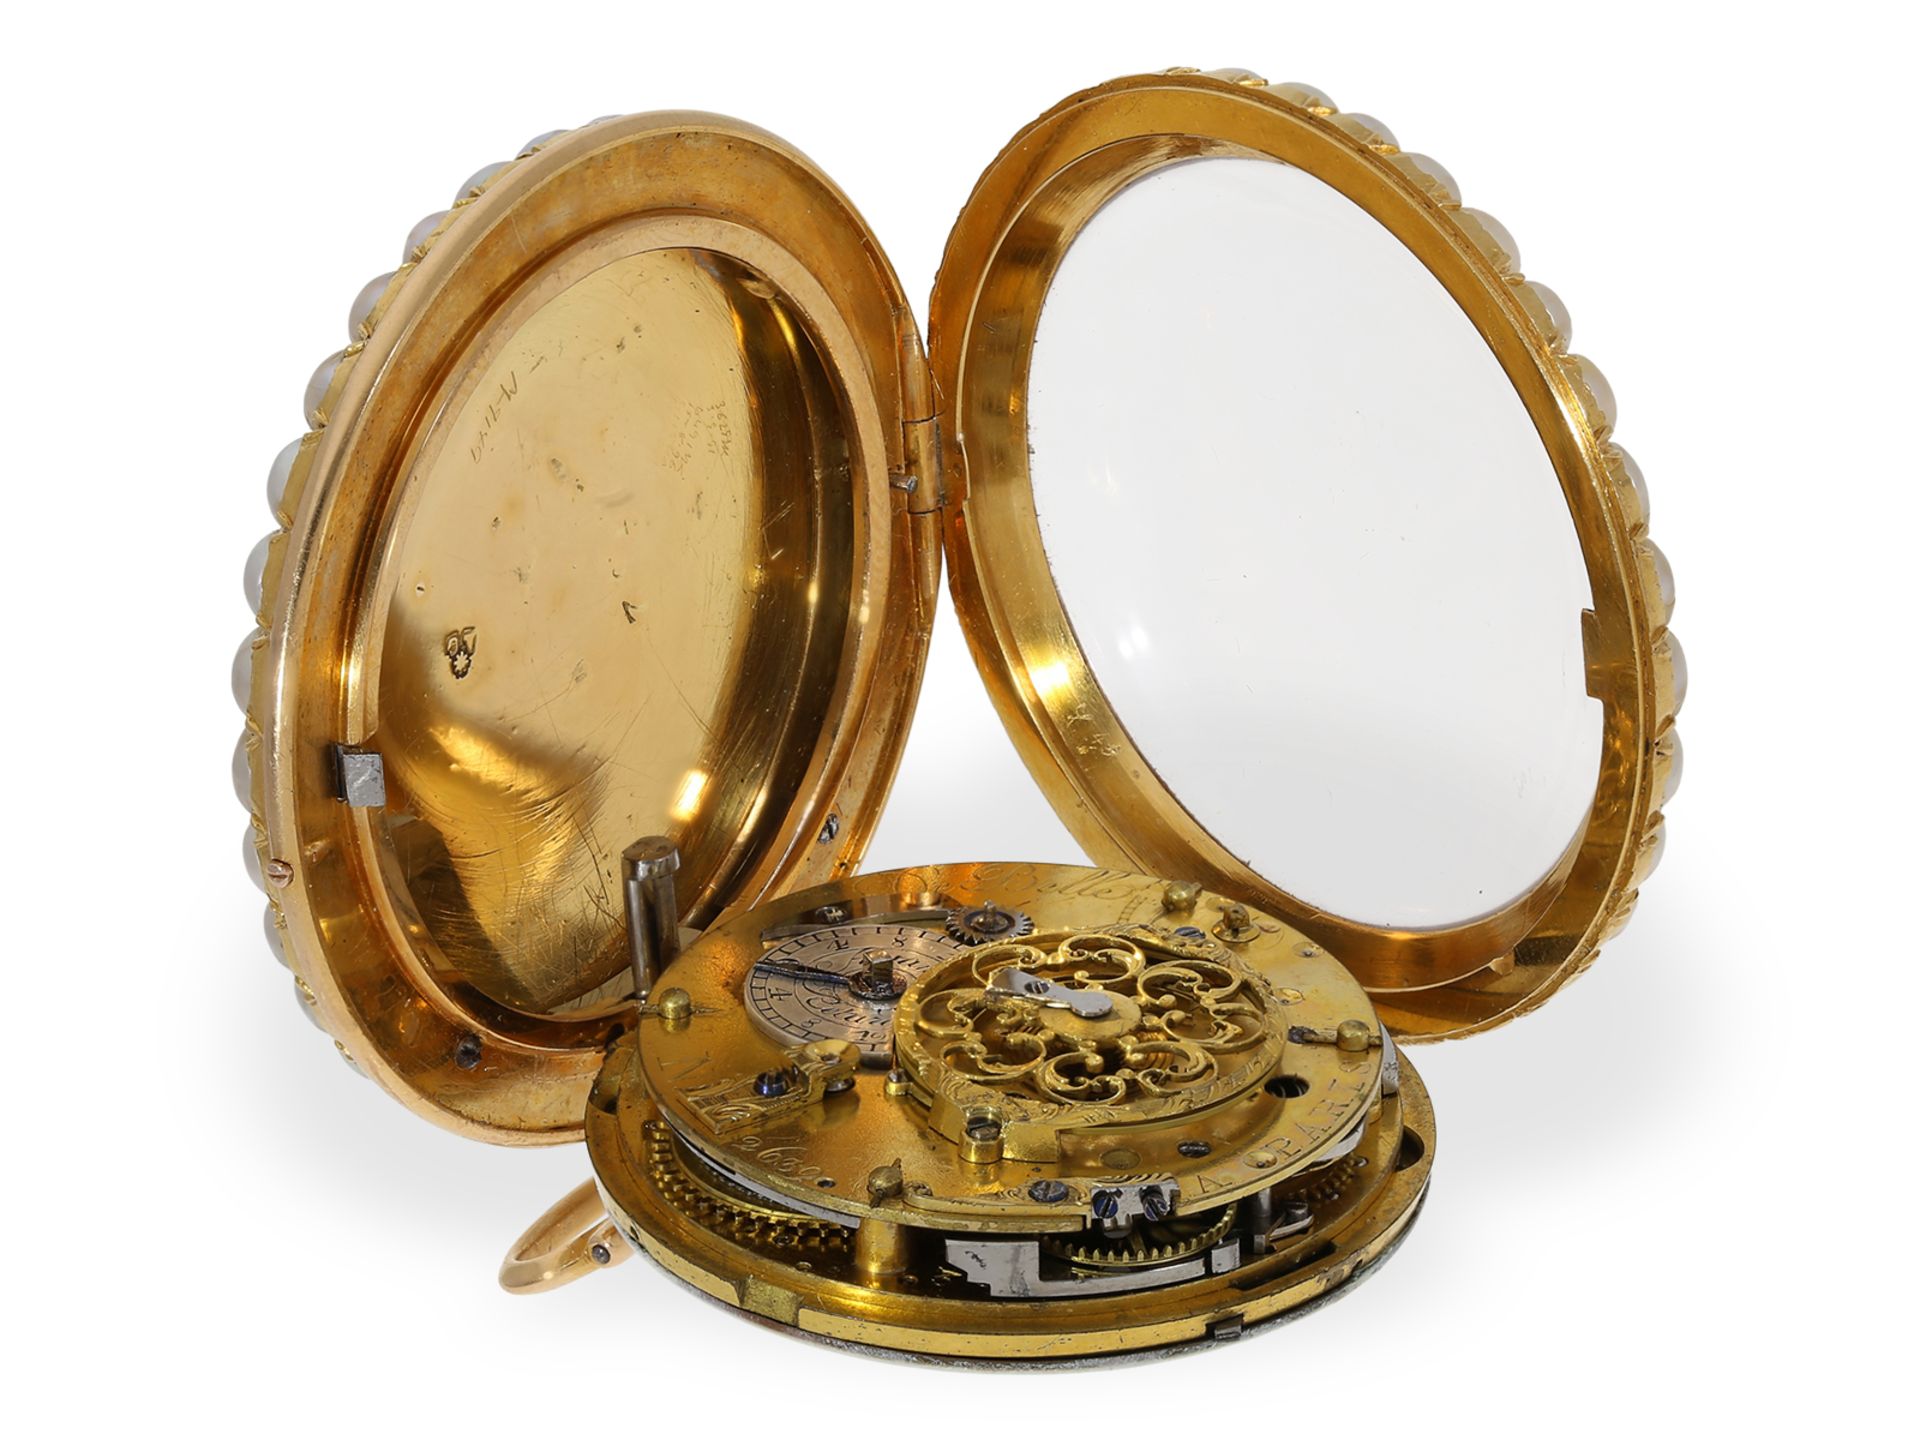 Pocket watch: very fine gold/enamel verge watch set with Oriental pearls and repeater, ca. 1800 - Image 5 of 5